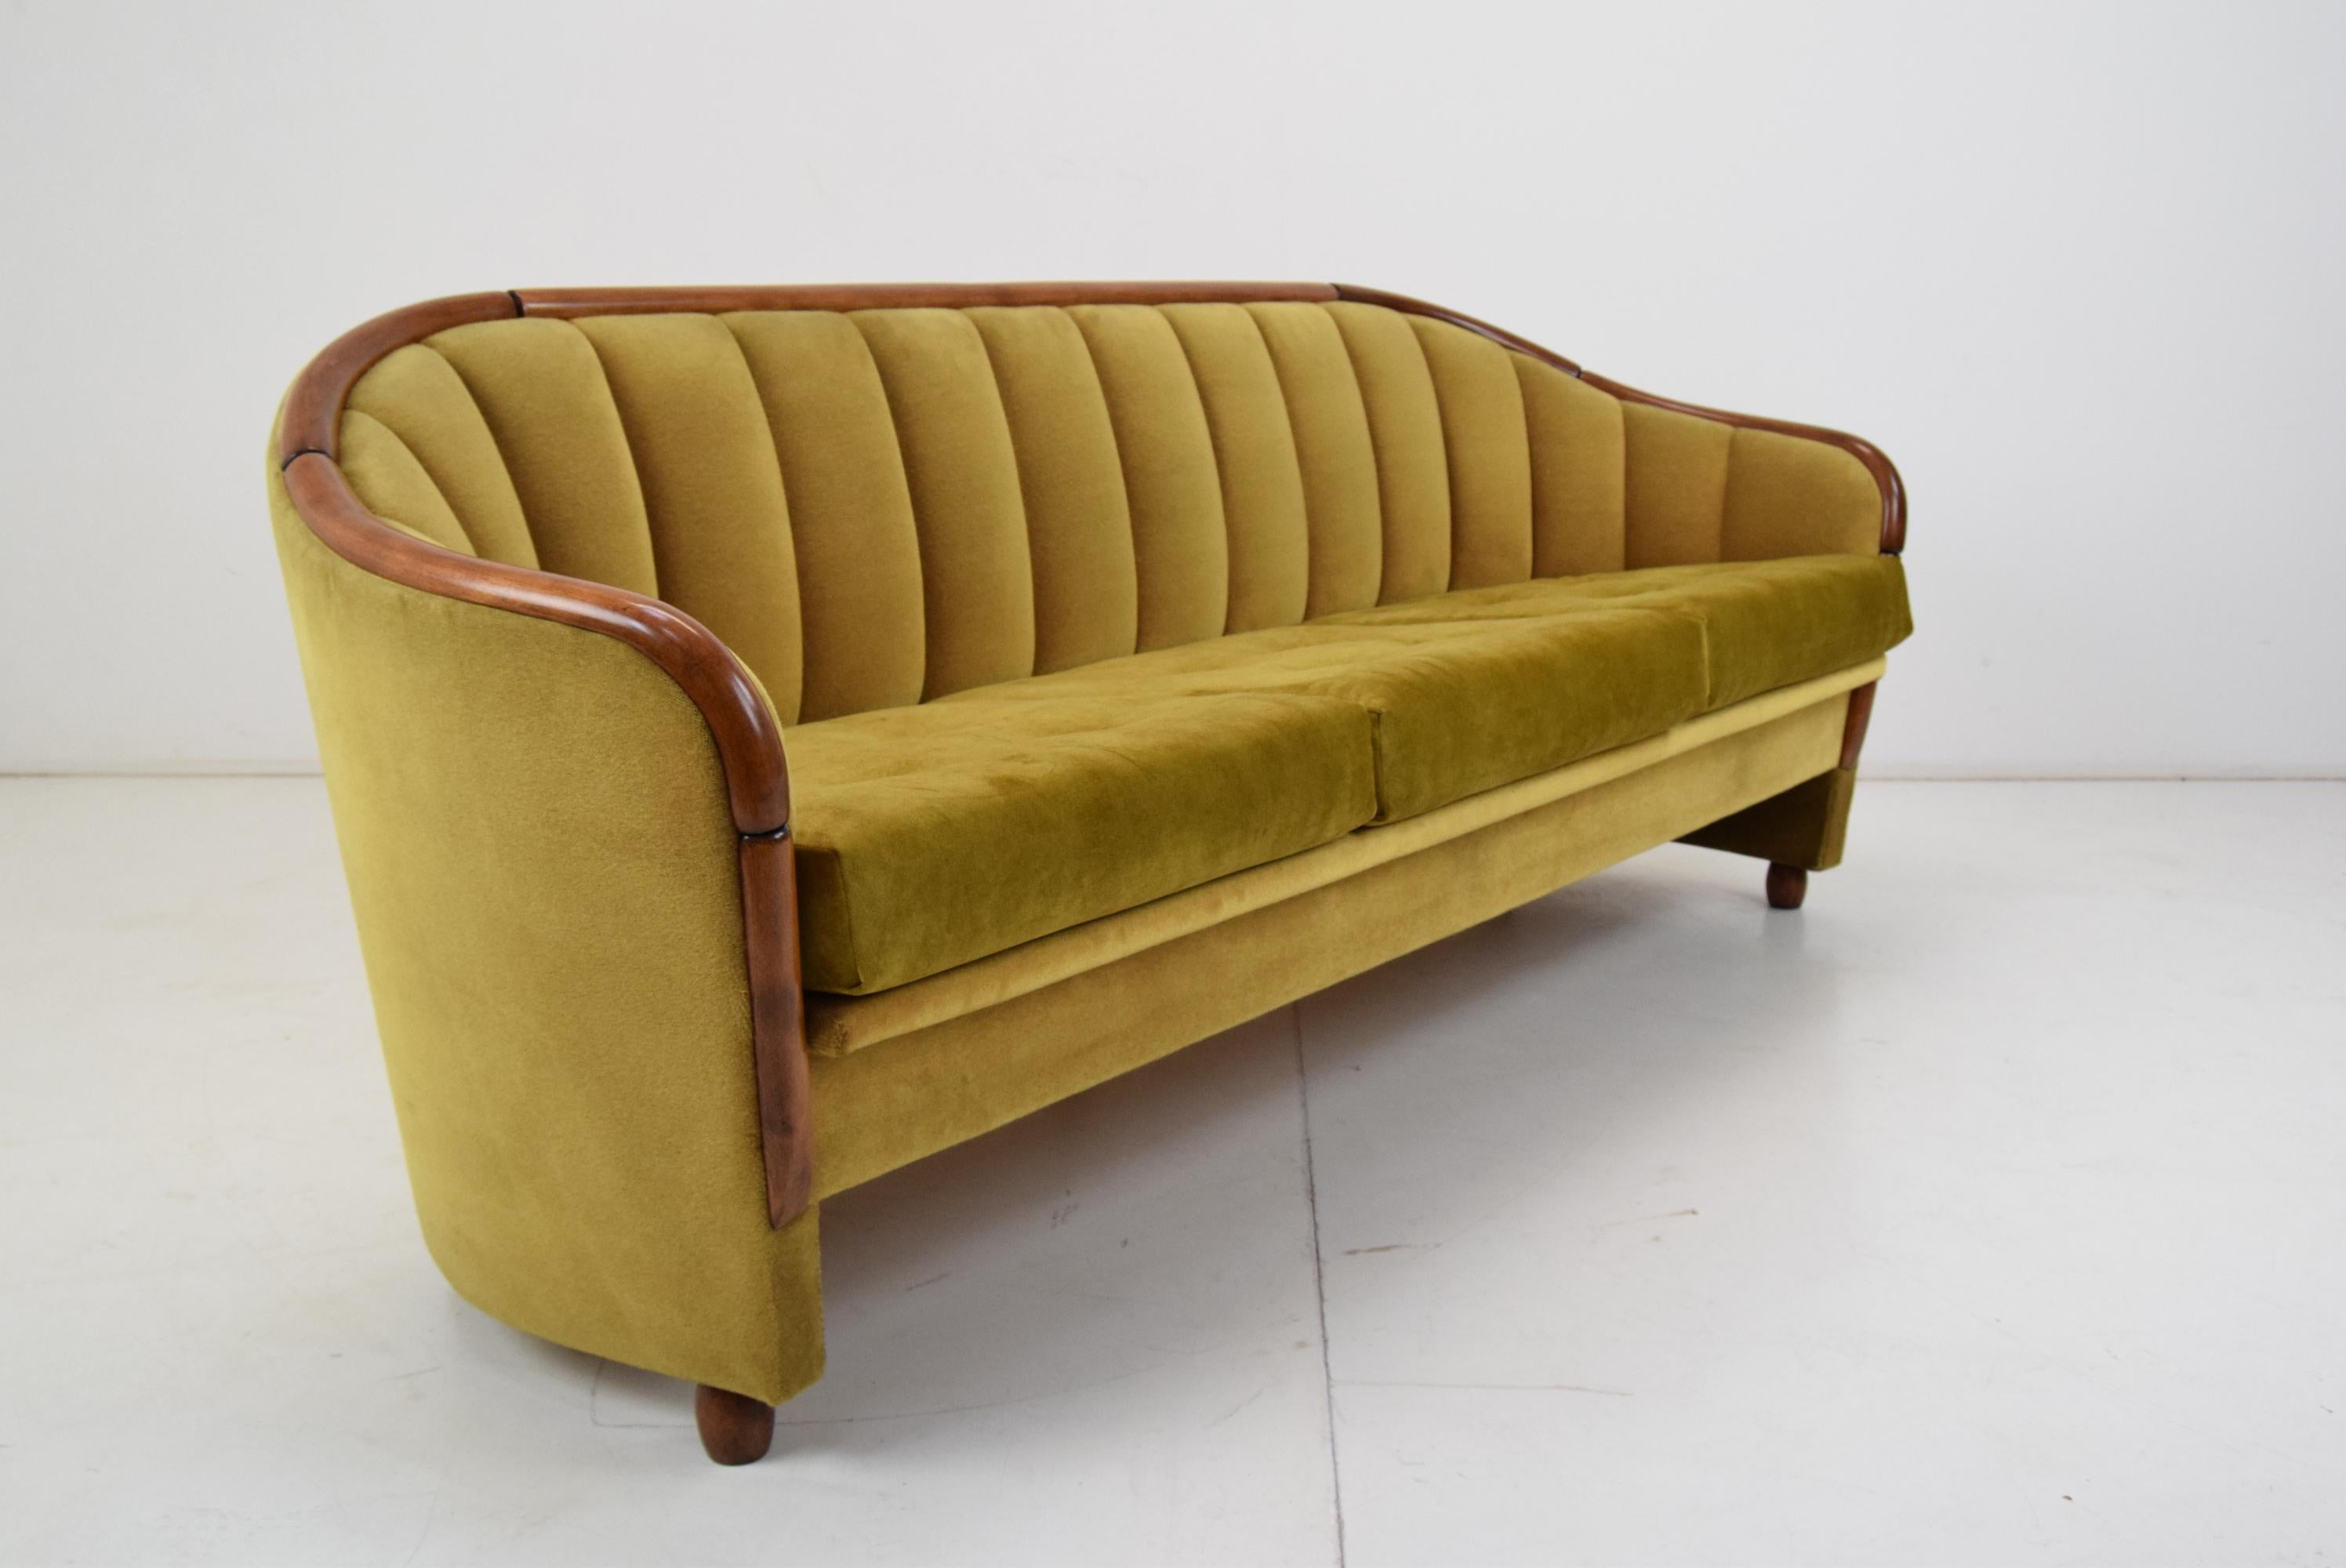 Czech Mid-Century 3-Seat Sofa in the Style of Gio Ponti, 1950's